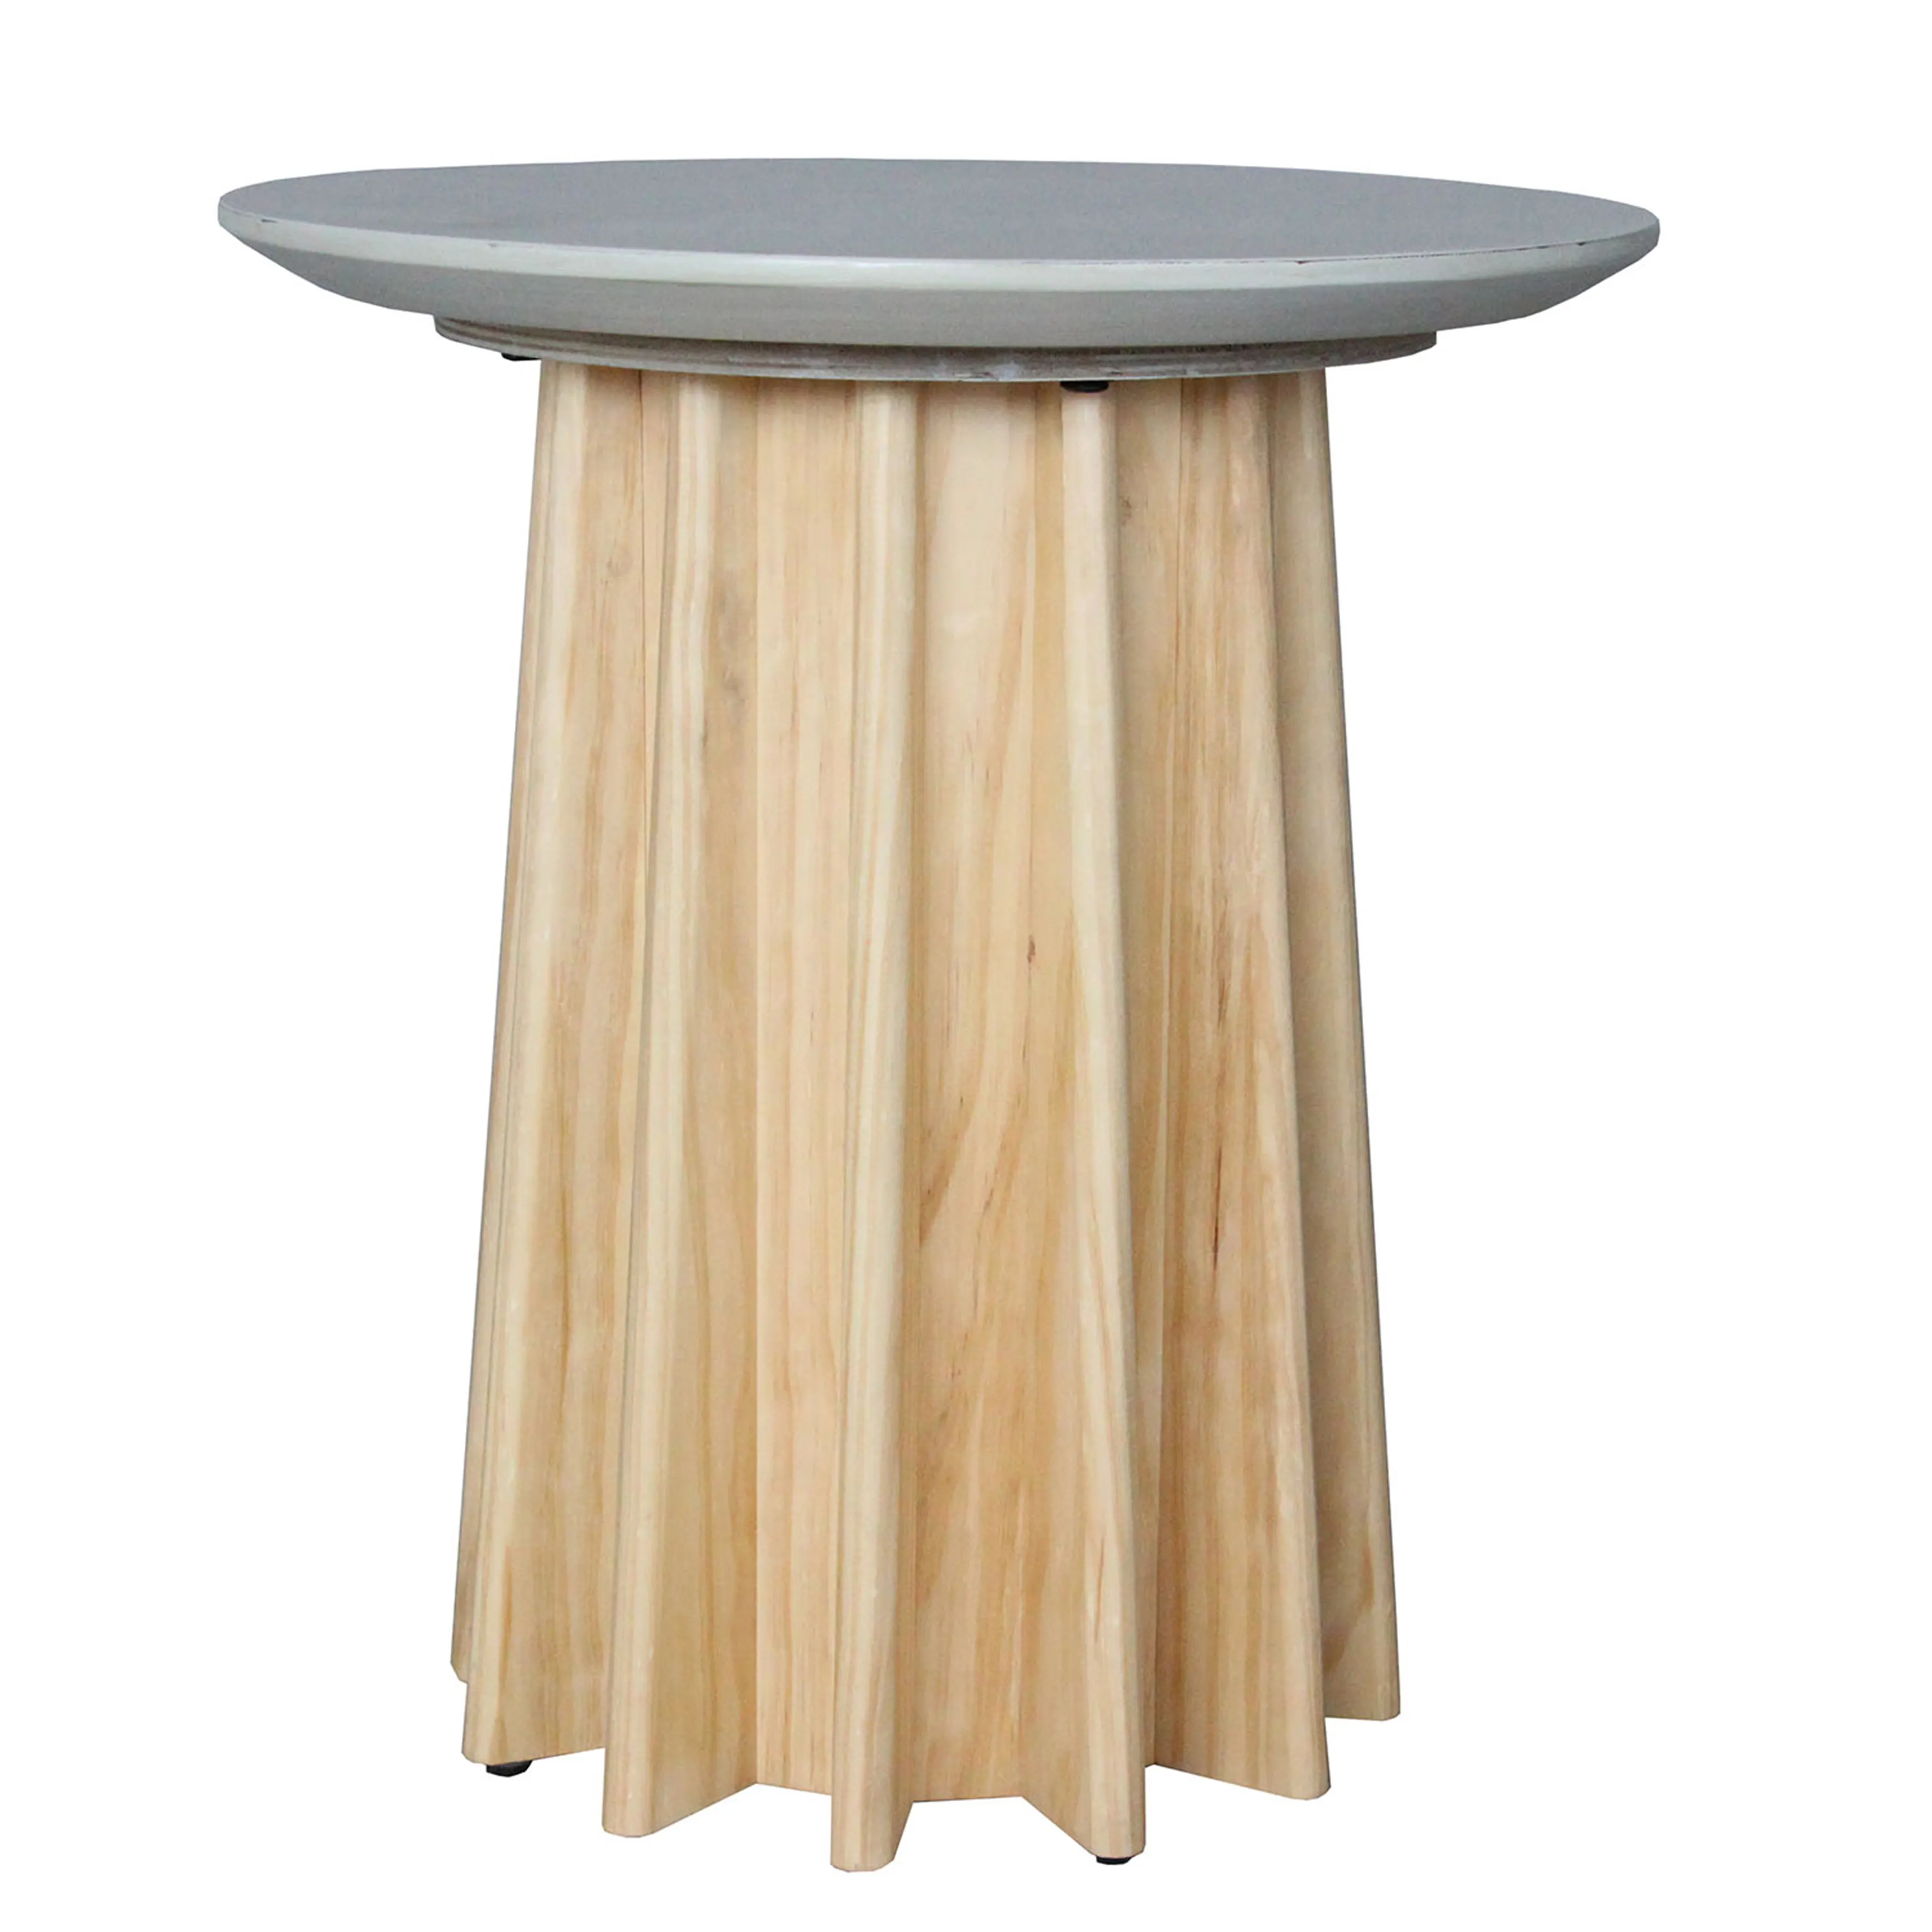 High quality concrete table Comfortable and durable oak legs